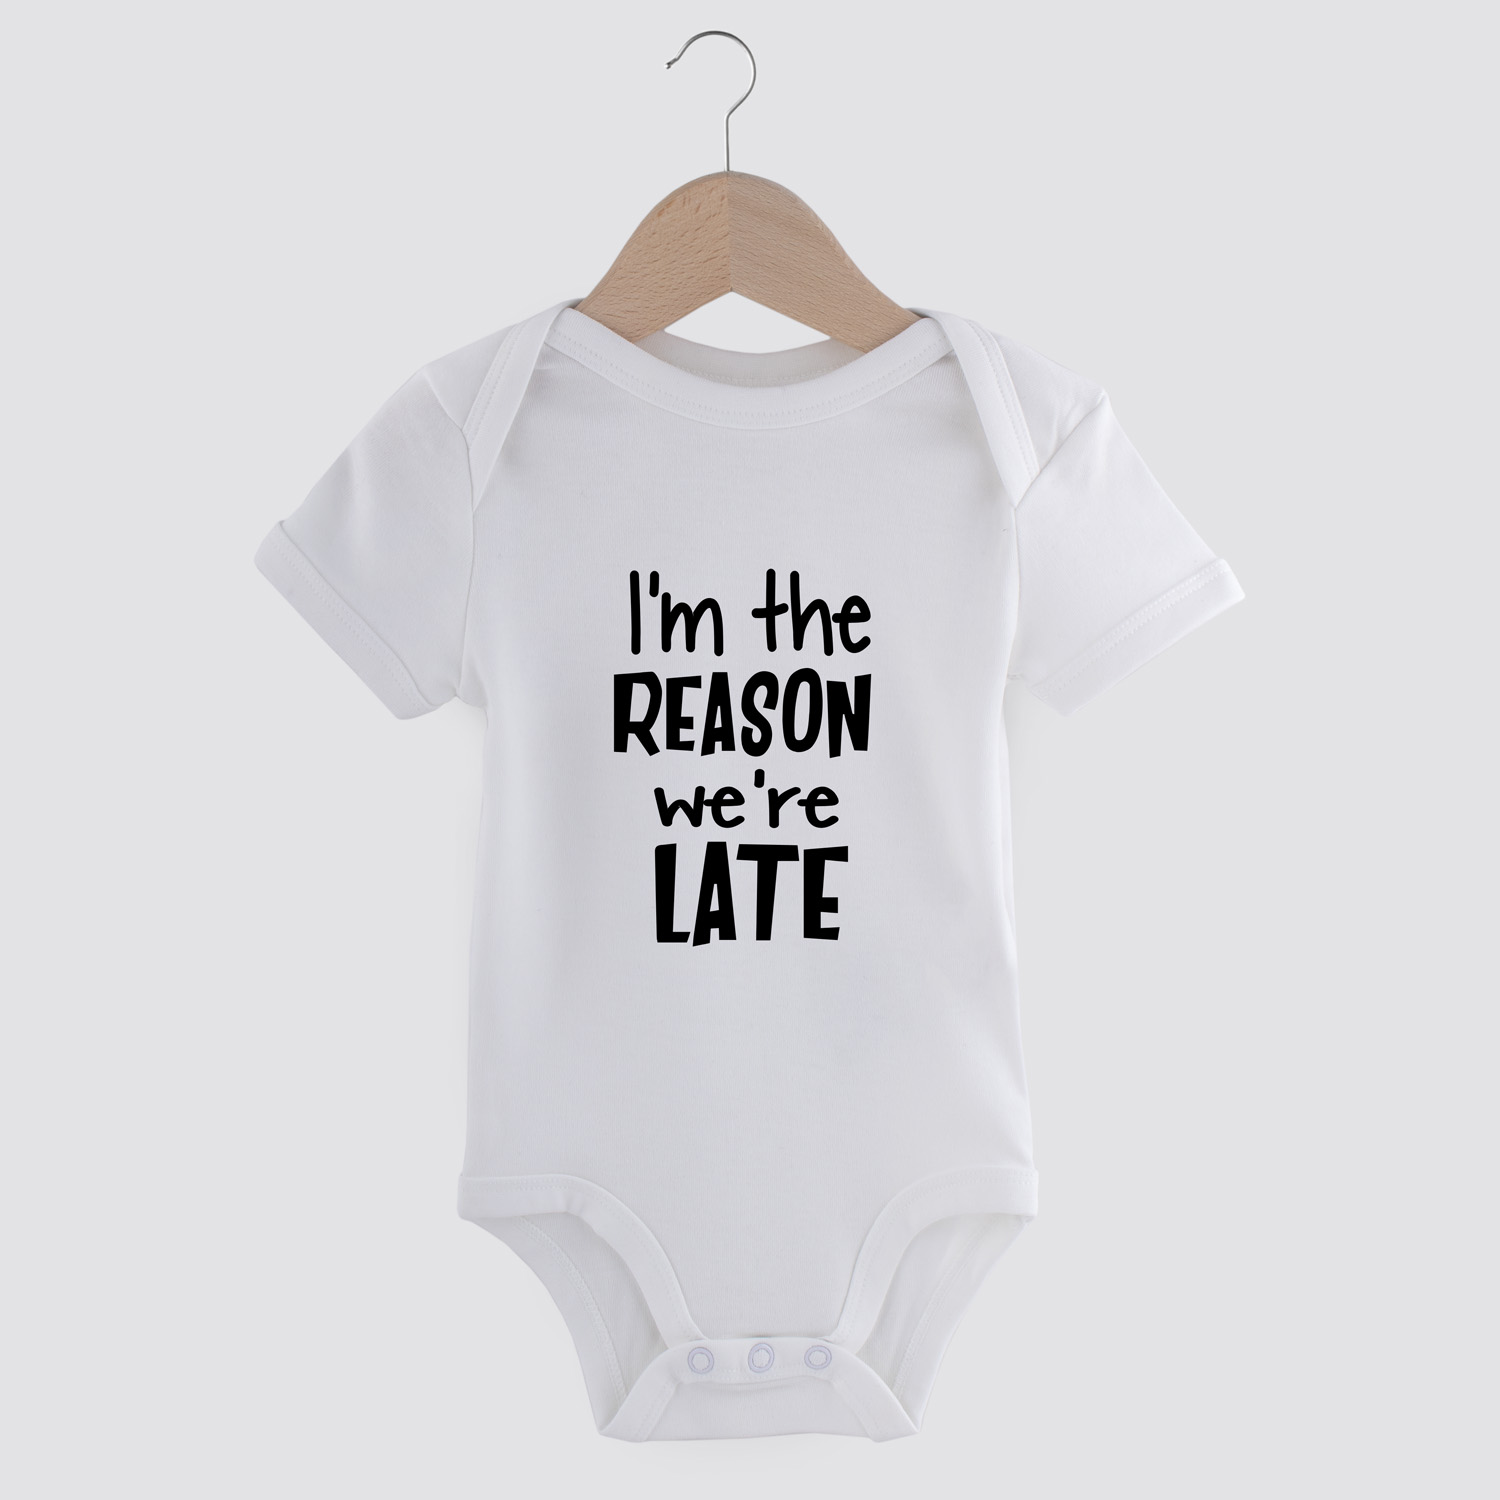 I'm the reason we're late | Baby romper | my fabulous life.